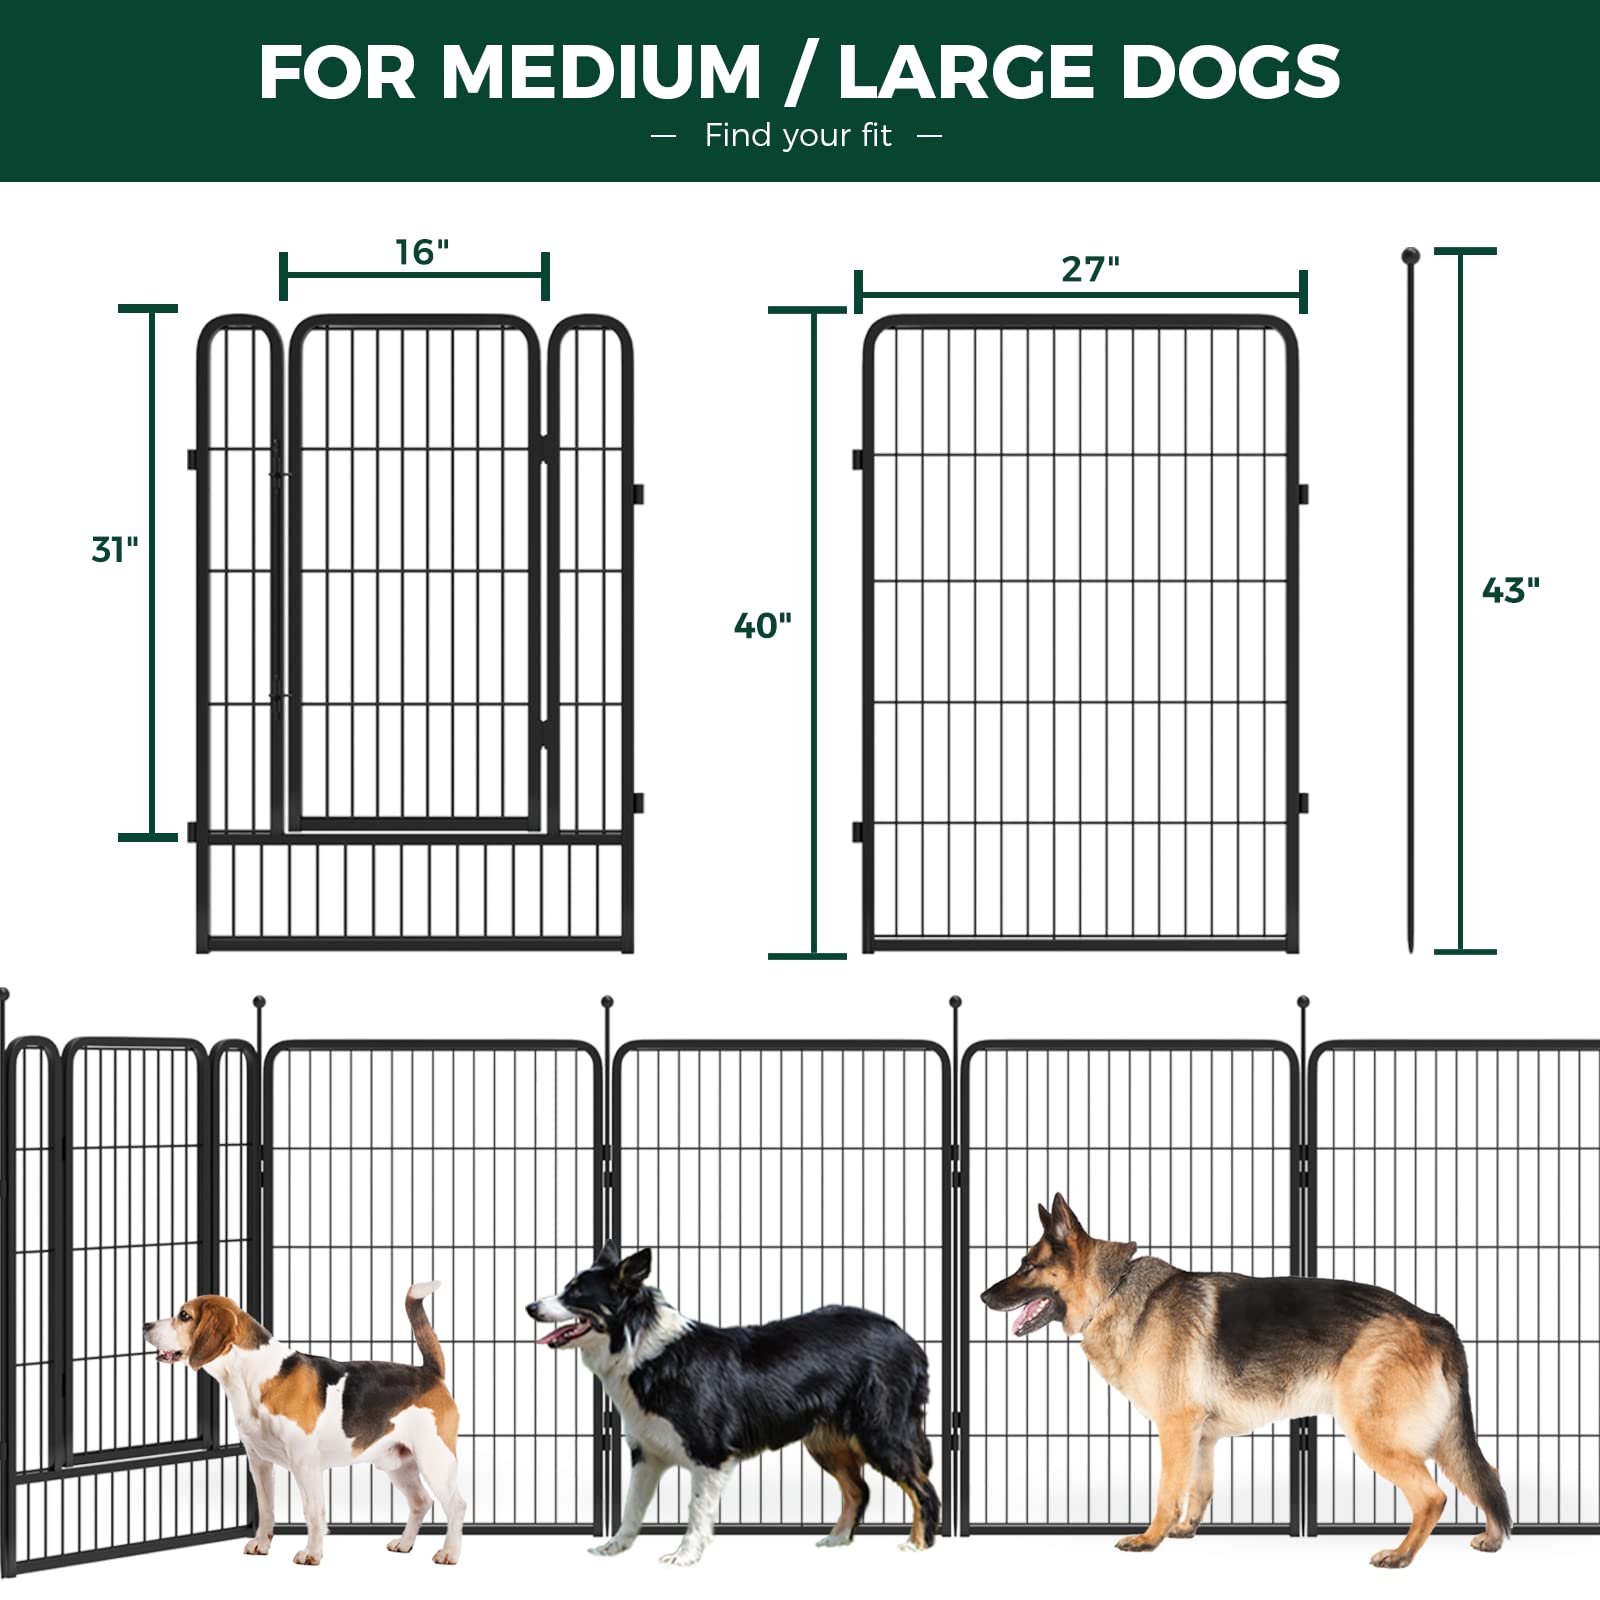 FXW Rollick Dog Playpen for Yard, RV Camping│Patented, 40 inch 16 Panels